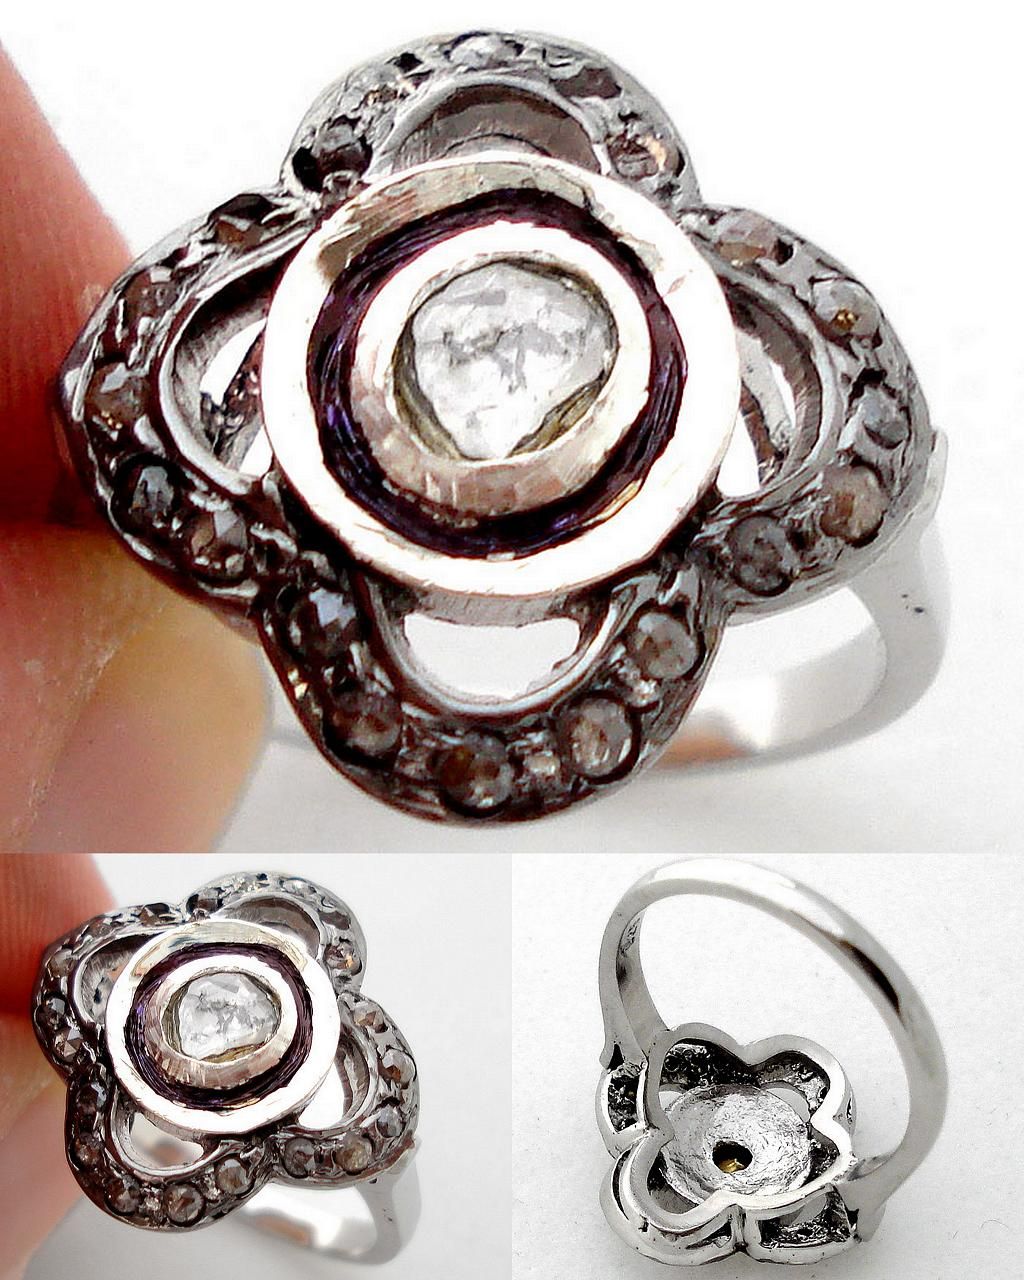  NATURAL ROSE CUT 18K DIAMOND STERLING SILVER VICTORIAN RING 1380